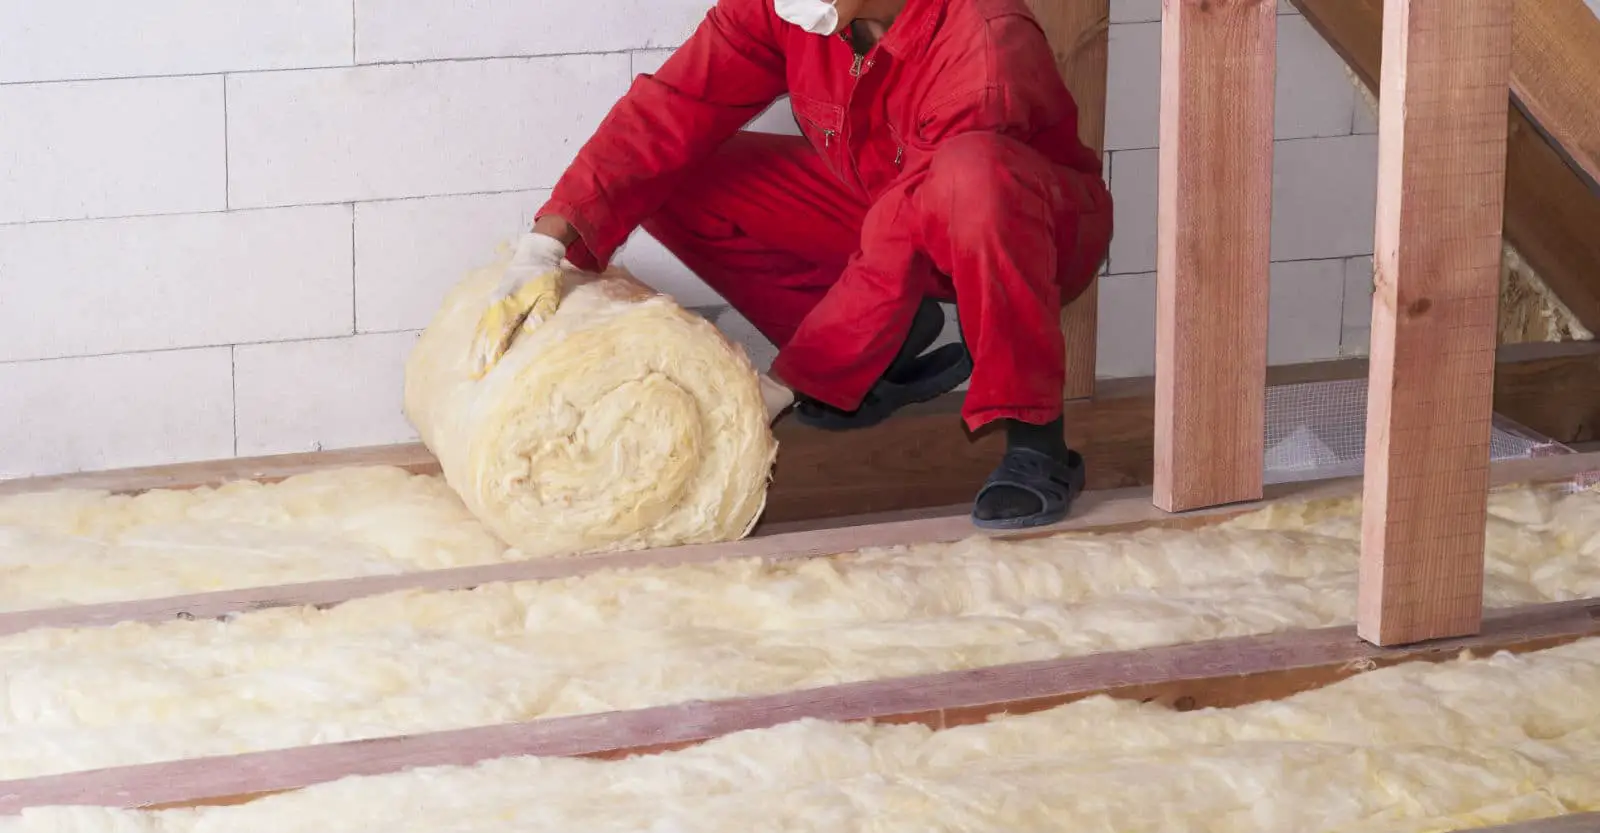 How To Install Rolled Insulation In Ceiling